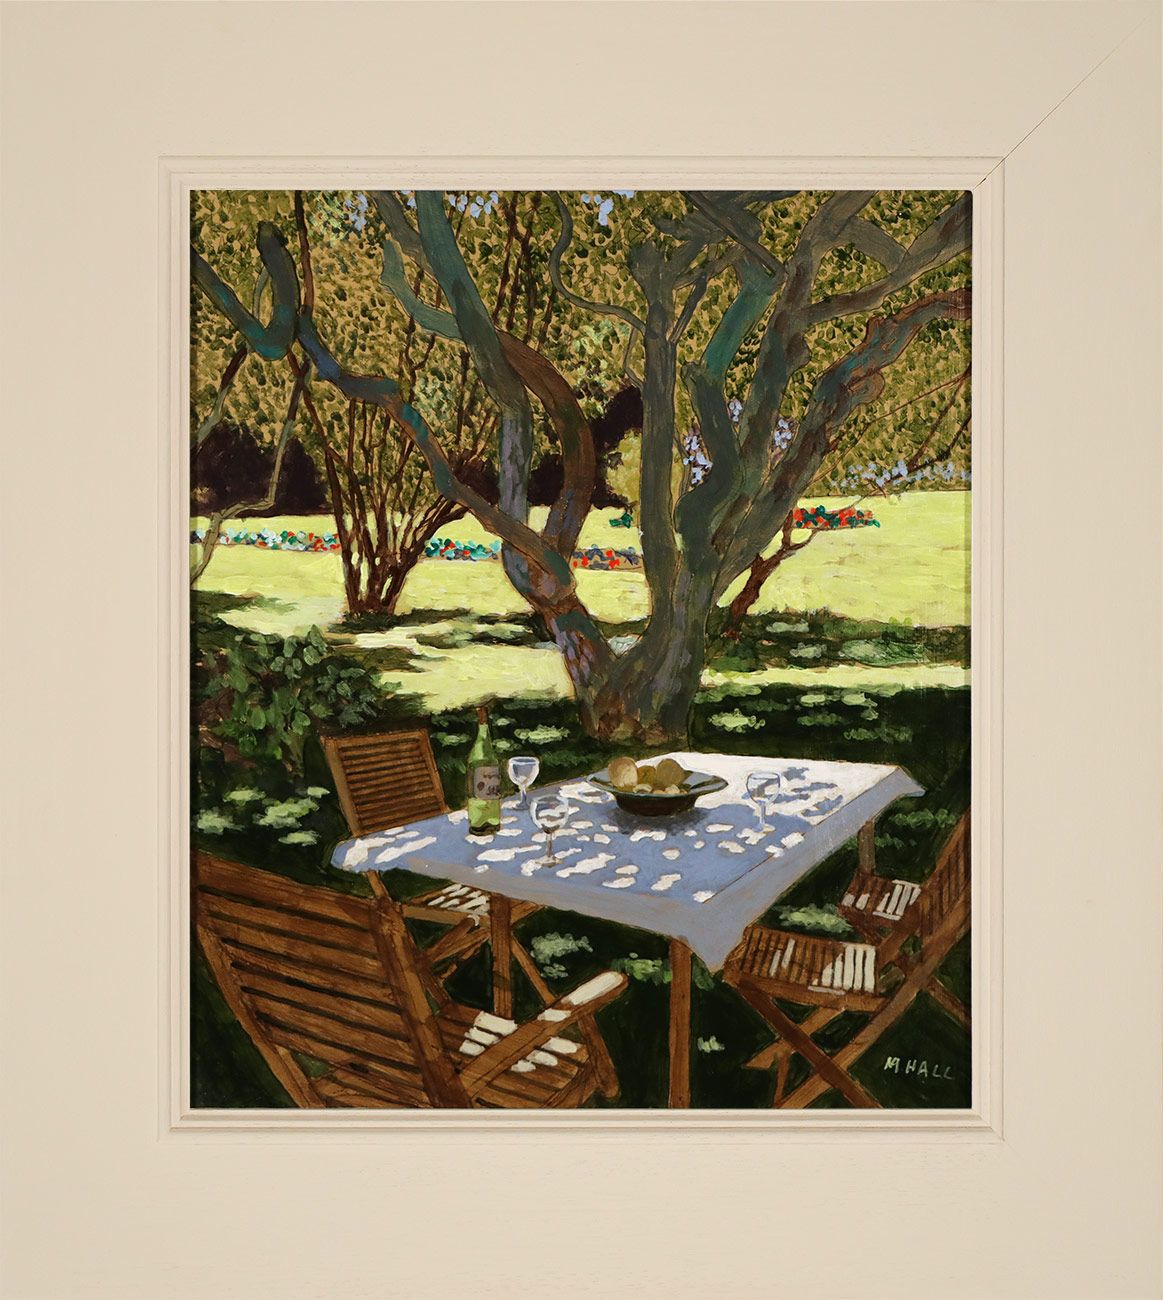 Mike Hall, Original acrylic painting on board, Cool Drinks in the Orchard Click to enlarge